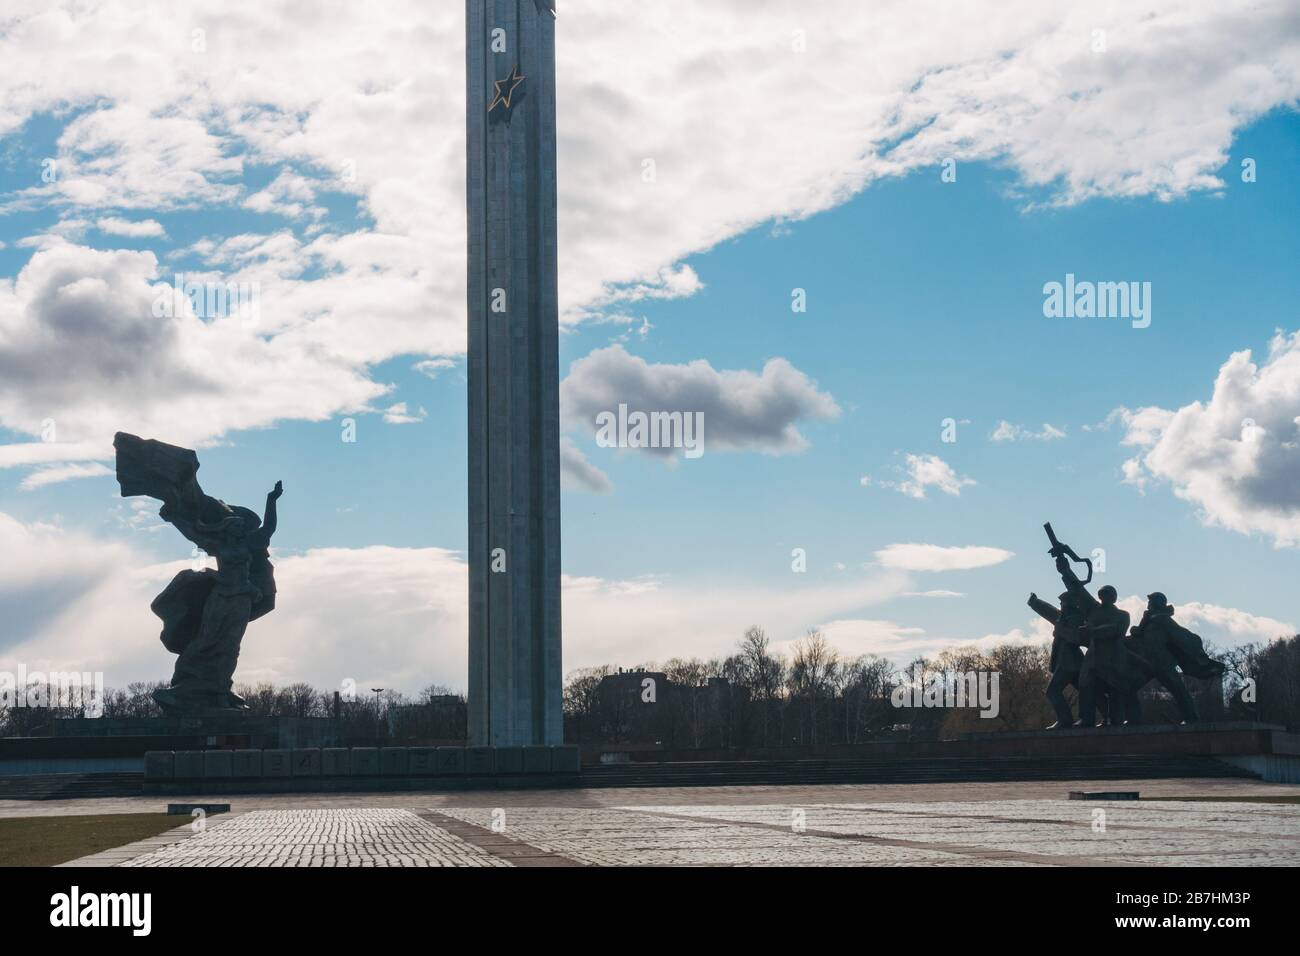 The Victory Memorial to Soviet Army in Riga, Latvia. Erected in 1985 to commemorate the Soviet Army's victory over Nazi Germany in World War II Stock Photo